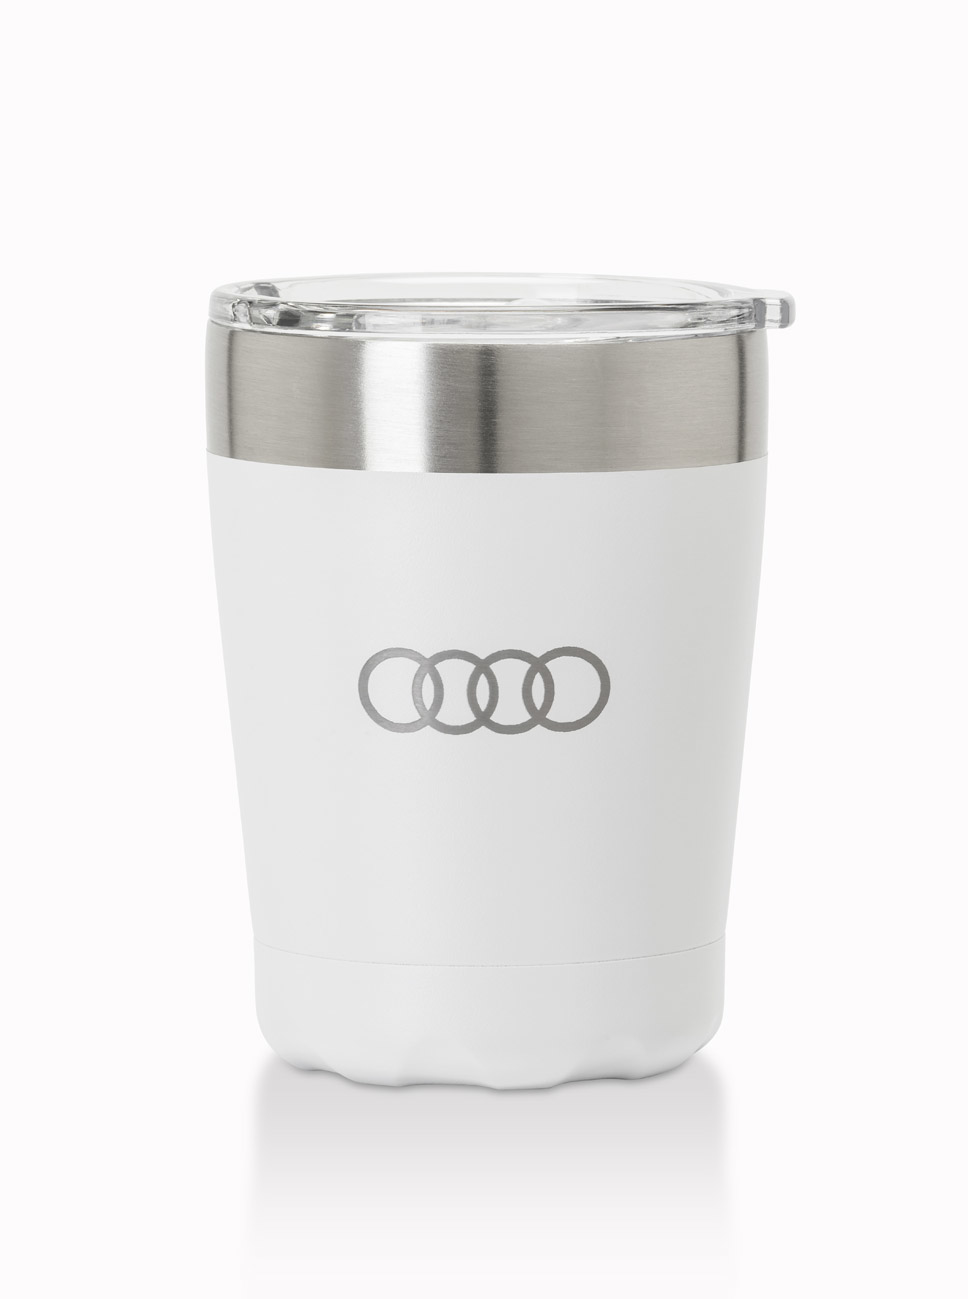 Oyster 350ml stainless steel cup in white with engraved logo